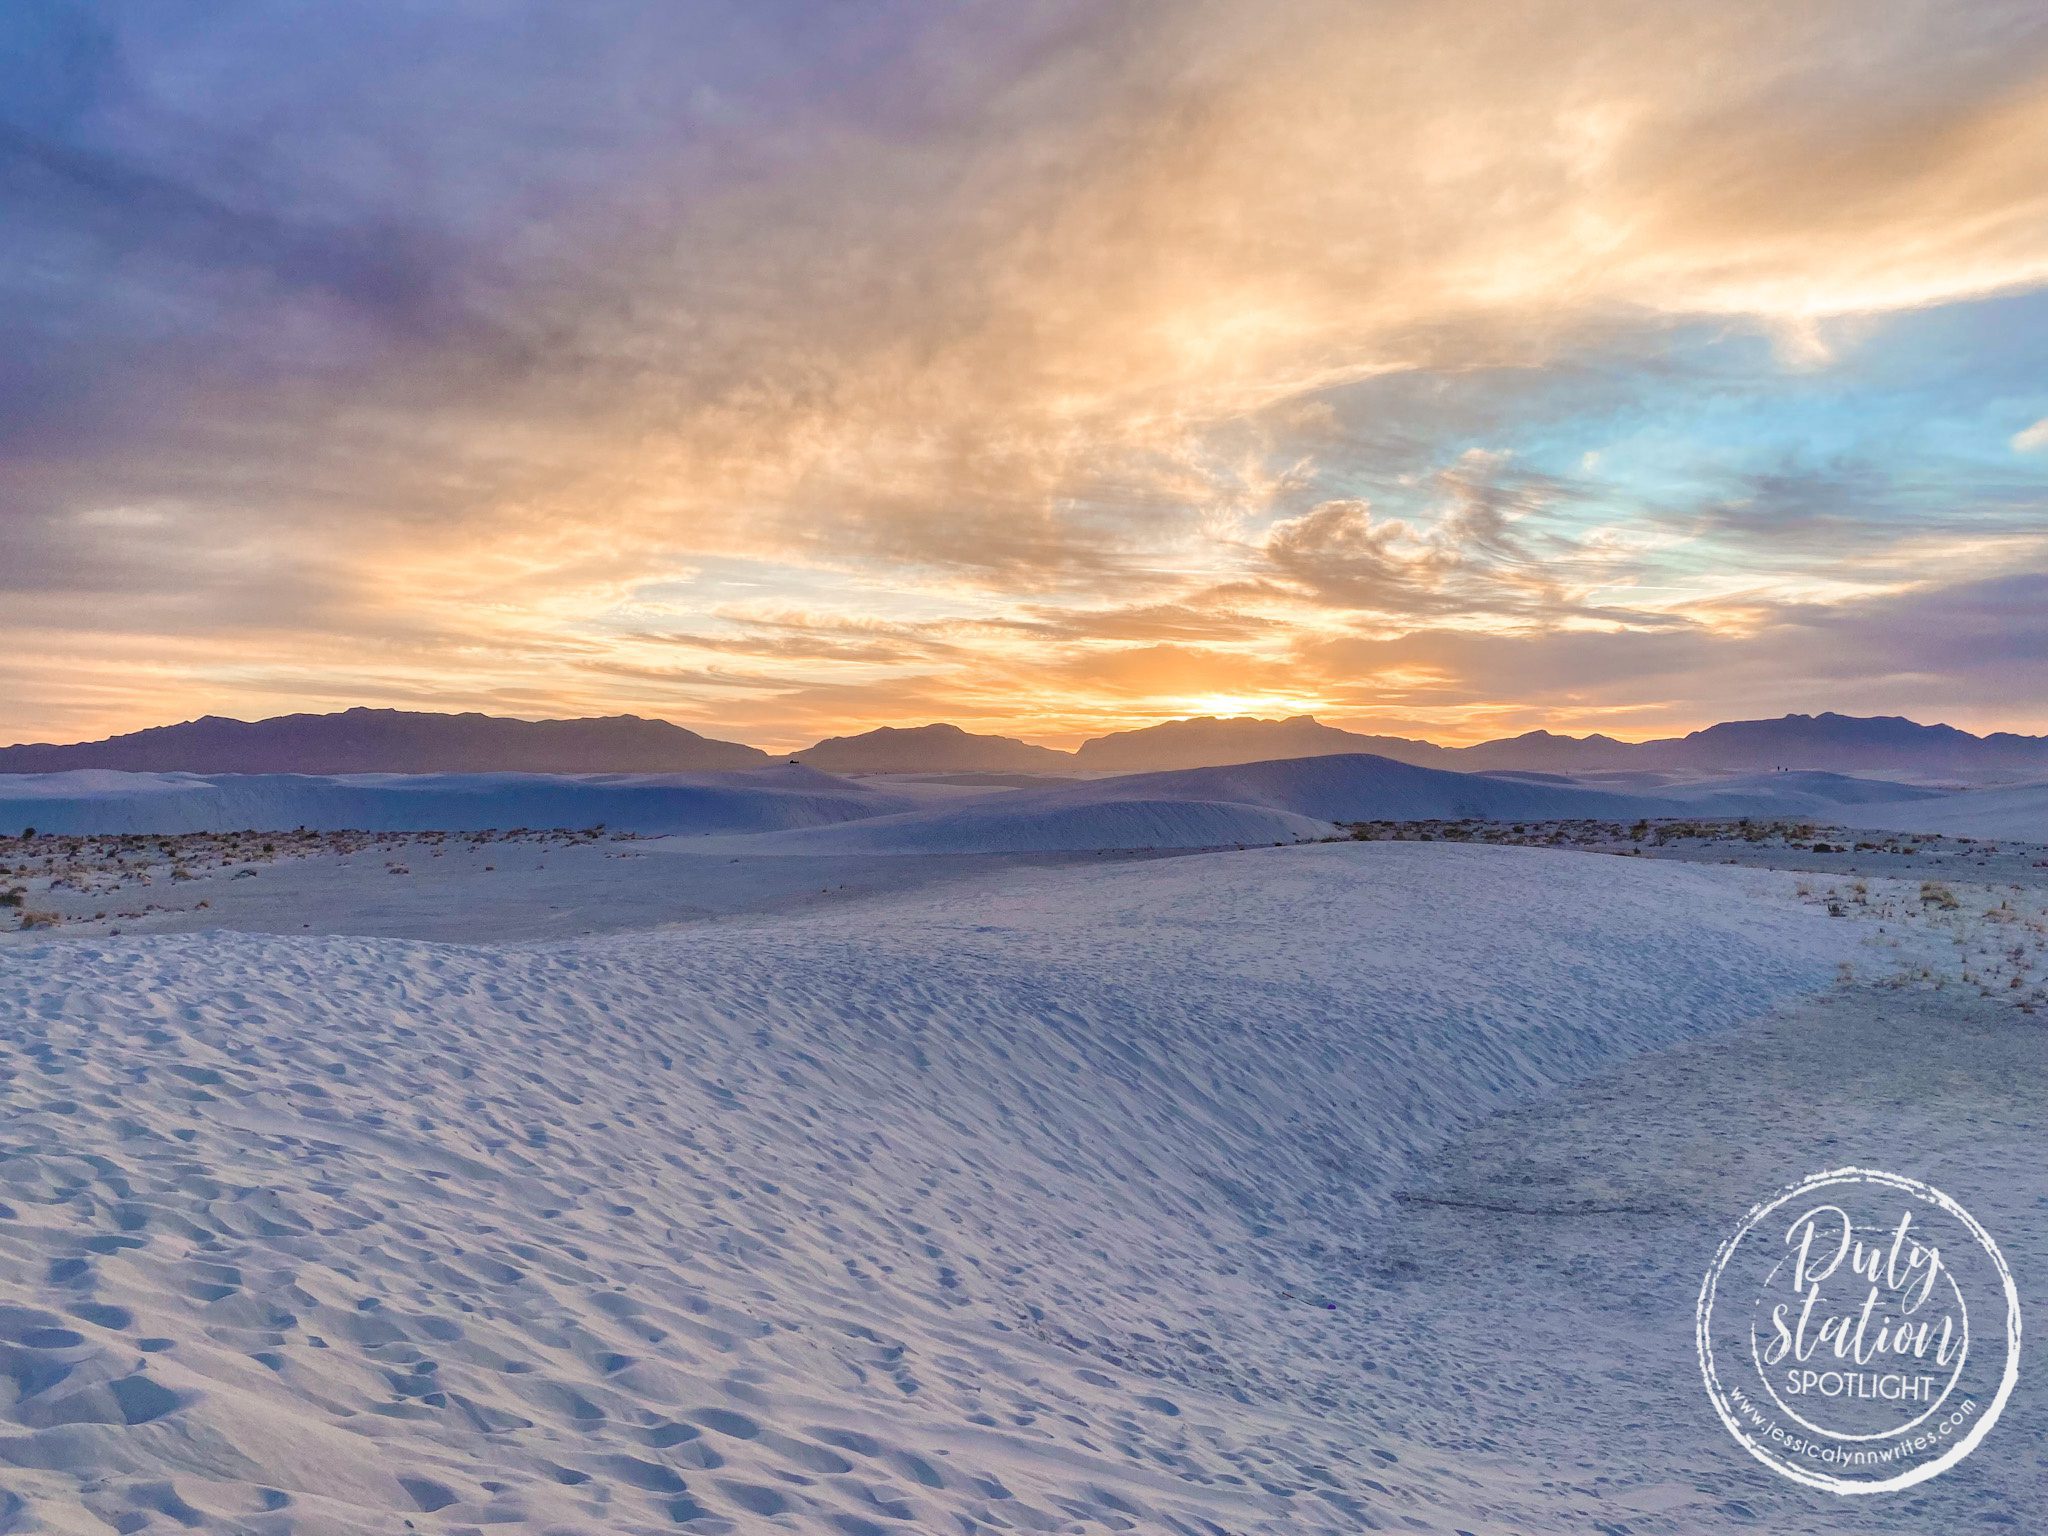 Looking for things to do in Alamogordo? Look no further than White Sands; a beautiful National Park.